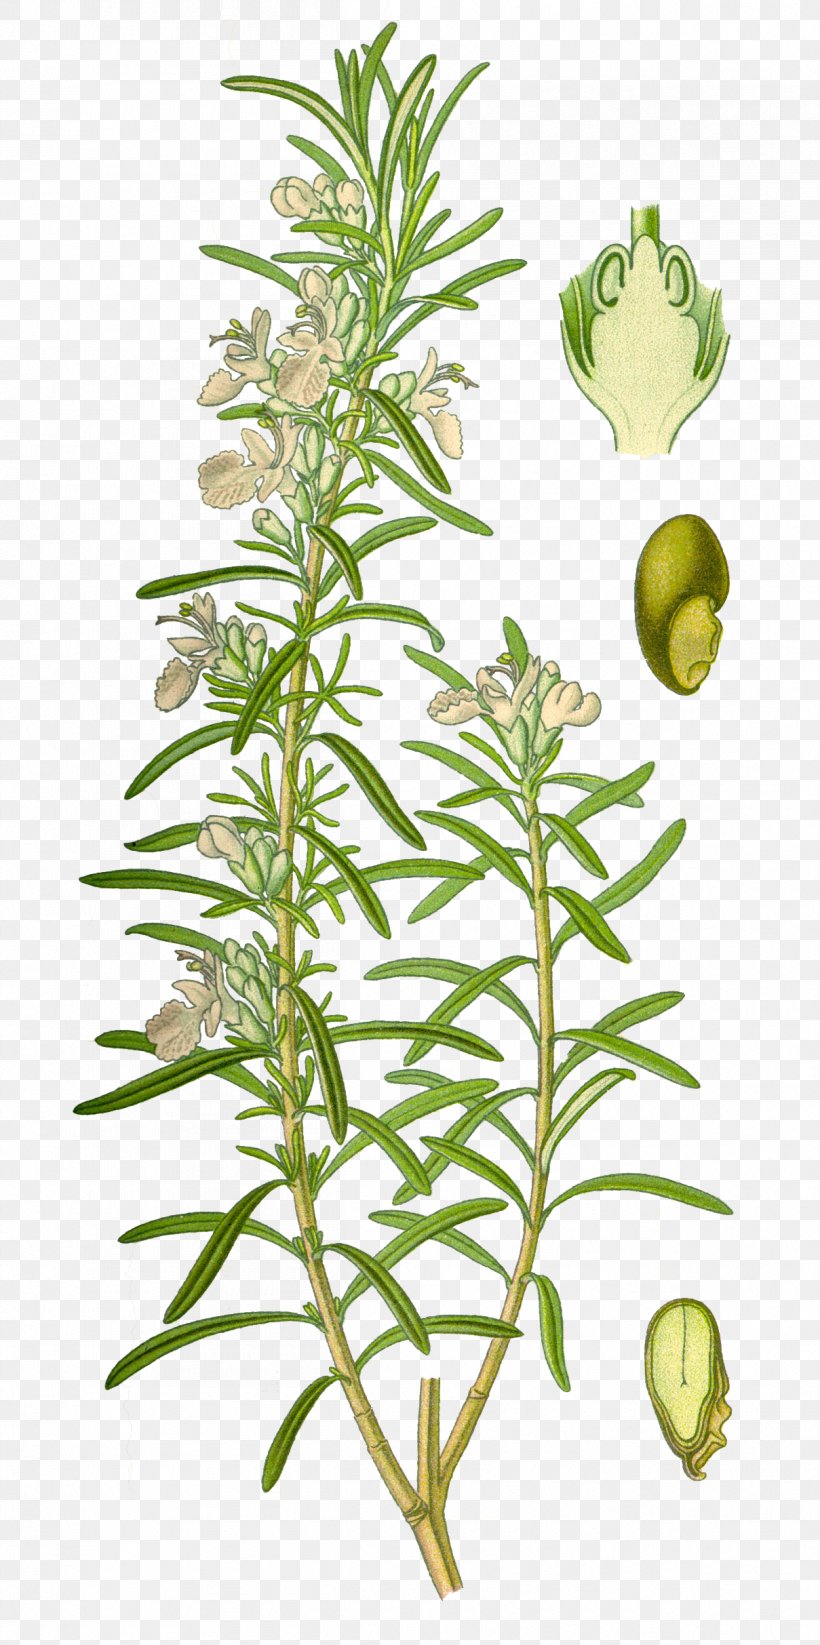 Rosemary Mediterranean Cuisine Herb Lamiaceae Officinalis, PNG, 1209x2426px, Rosemary, Botanical Illustration, Botany, Essential Oil, Hemp Download Free